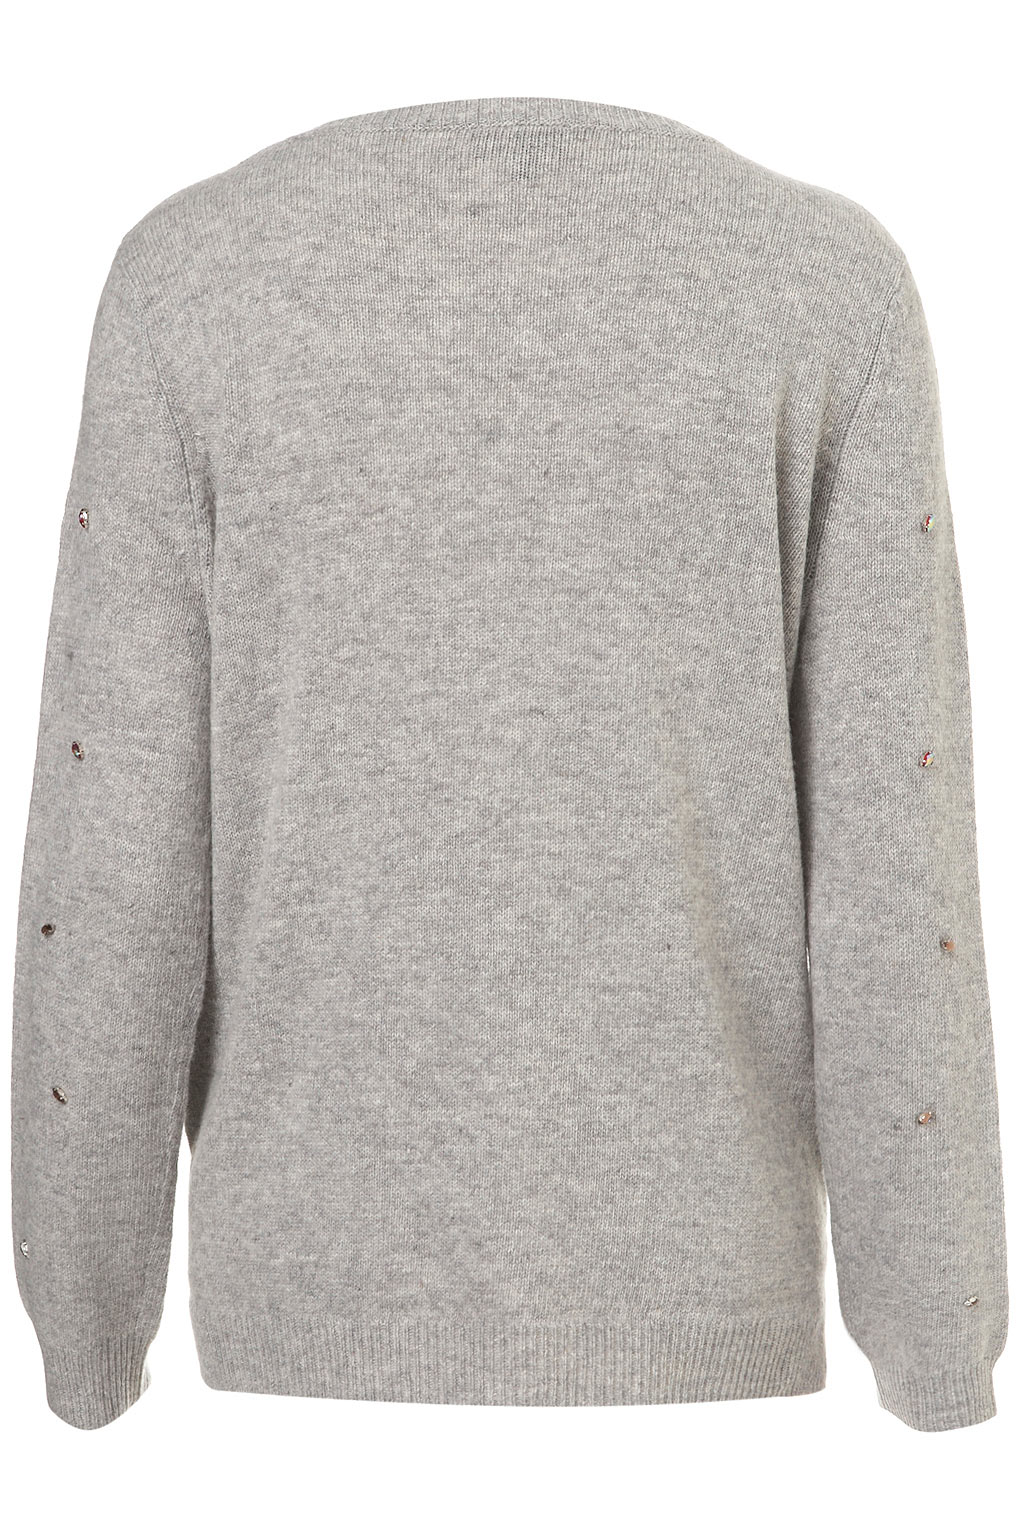 Lyst Topshop Knitted Crystal Sweater In Gray